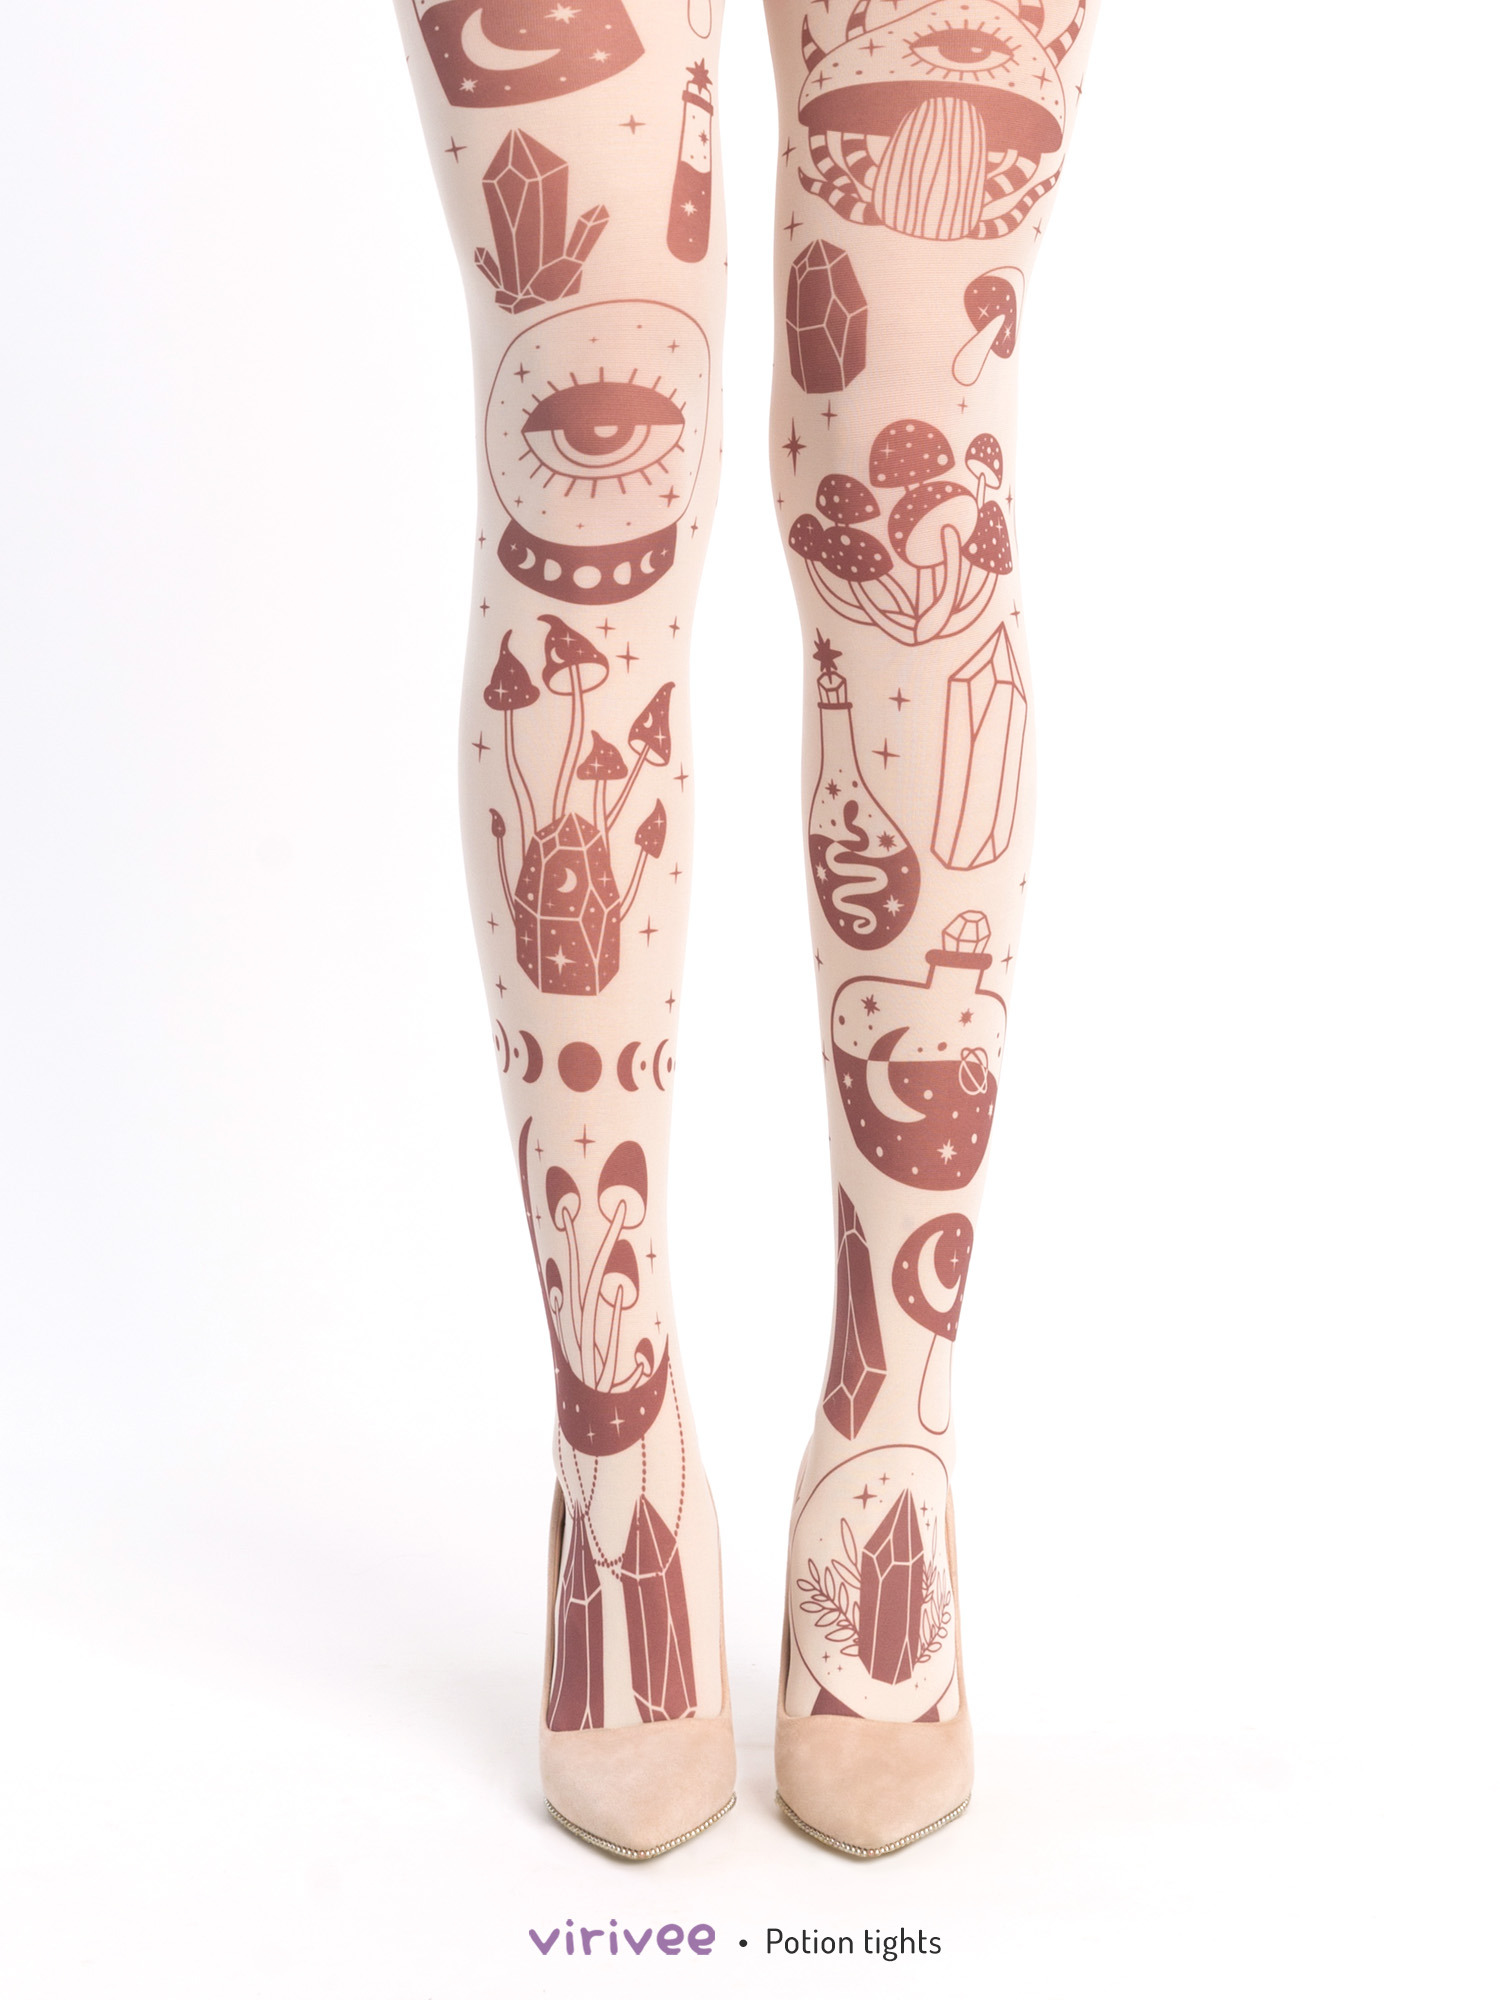 Mushroom and potion celestial tights, brown